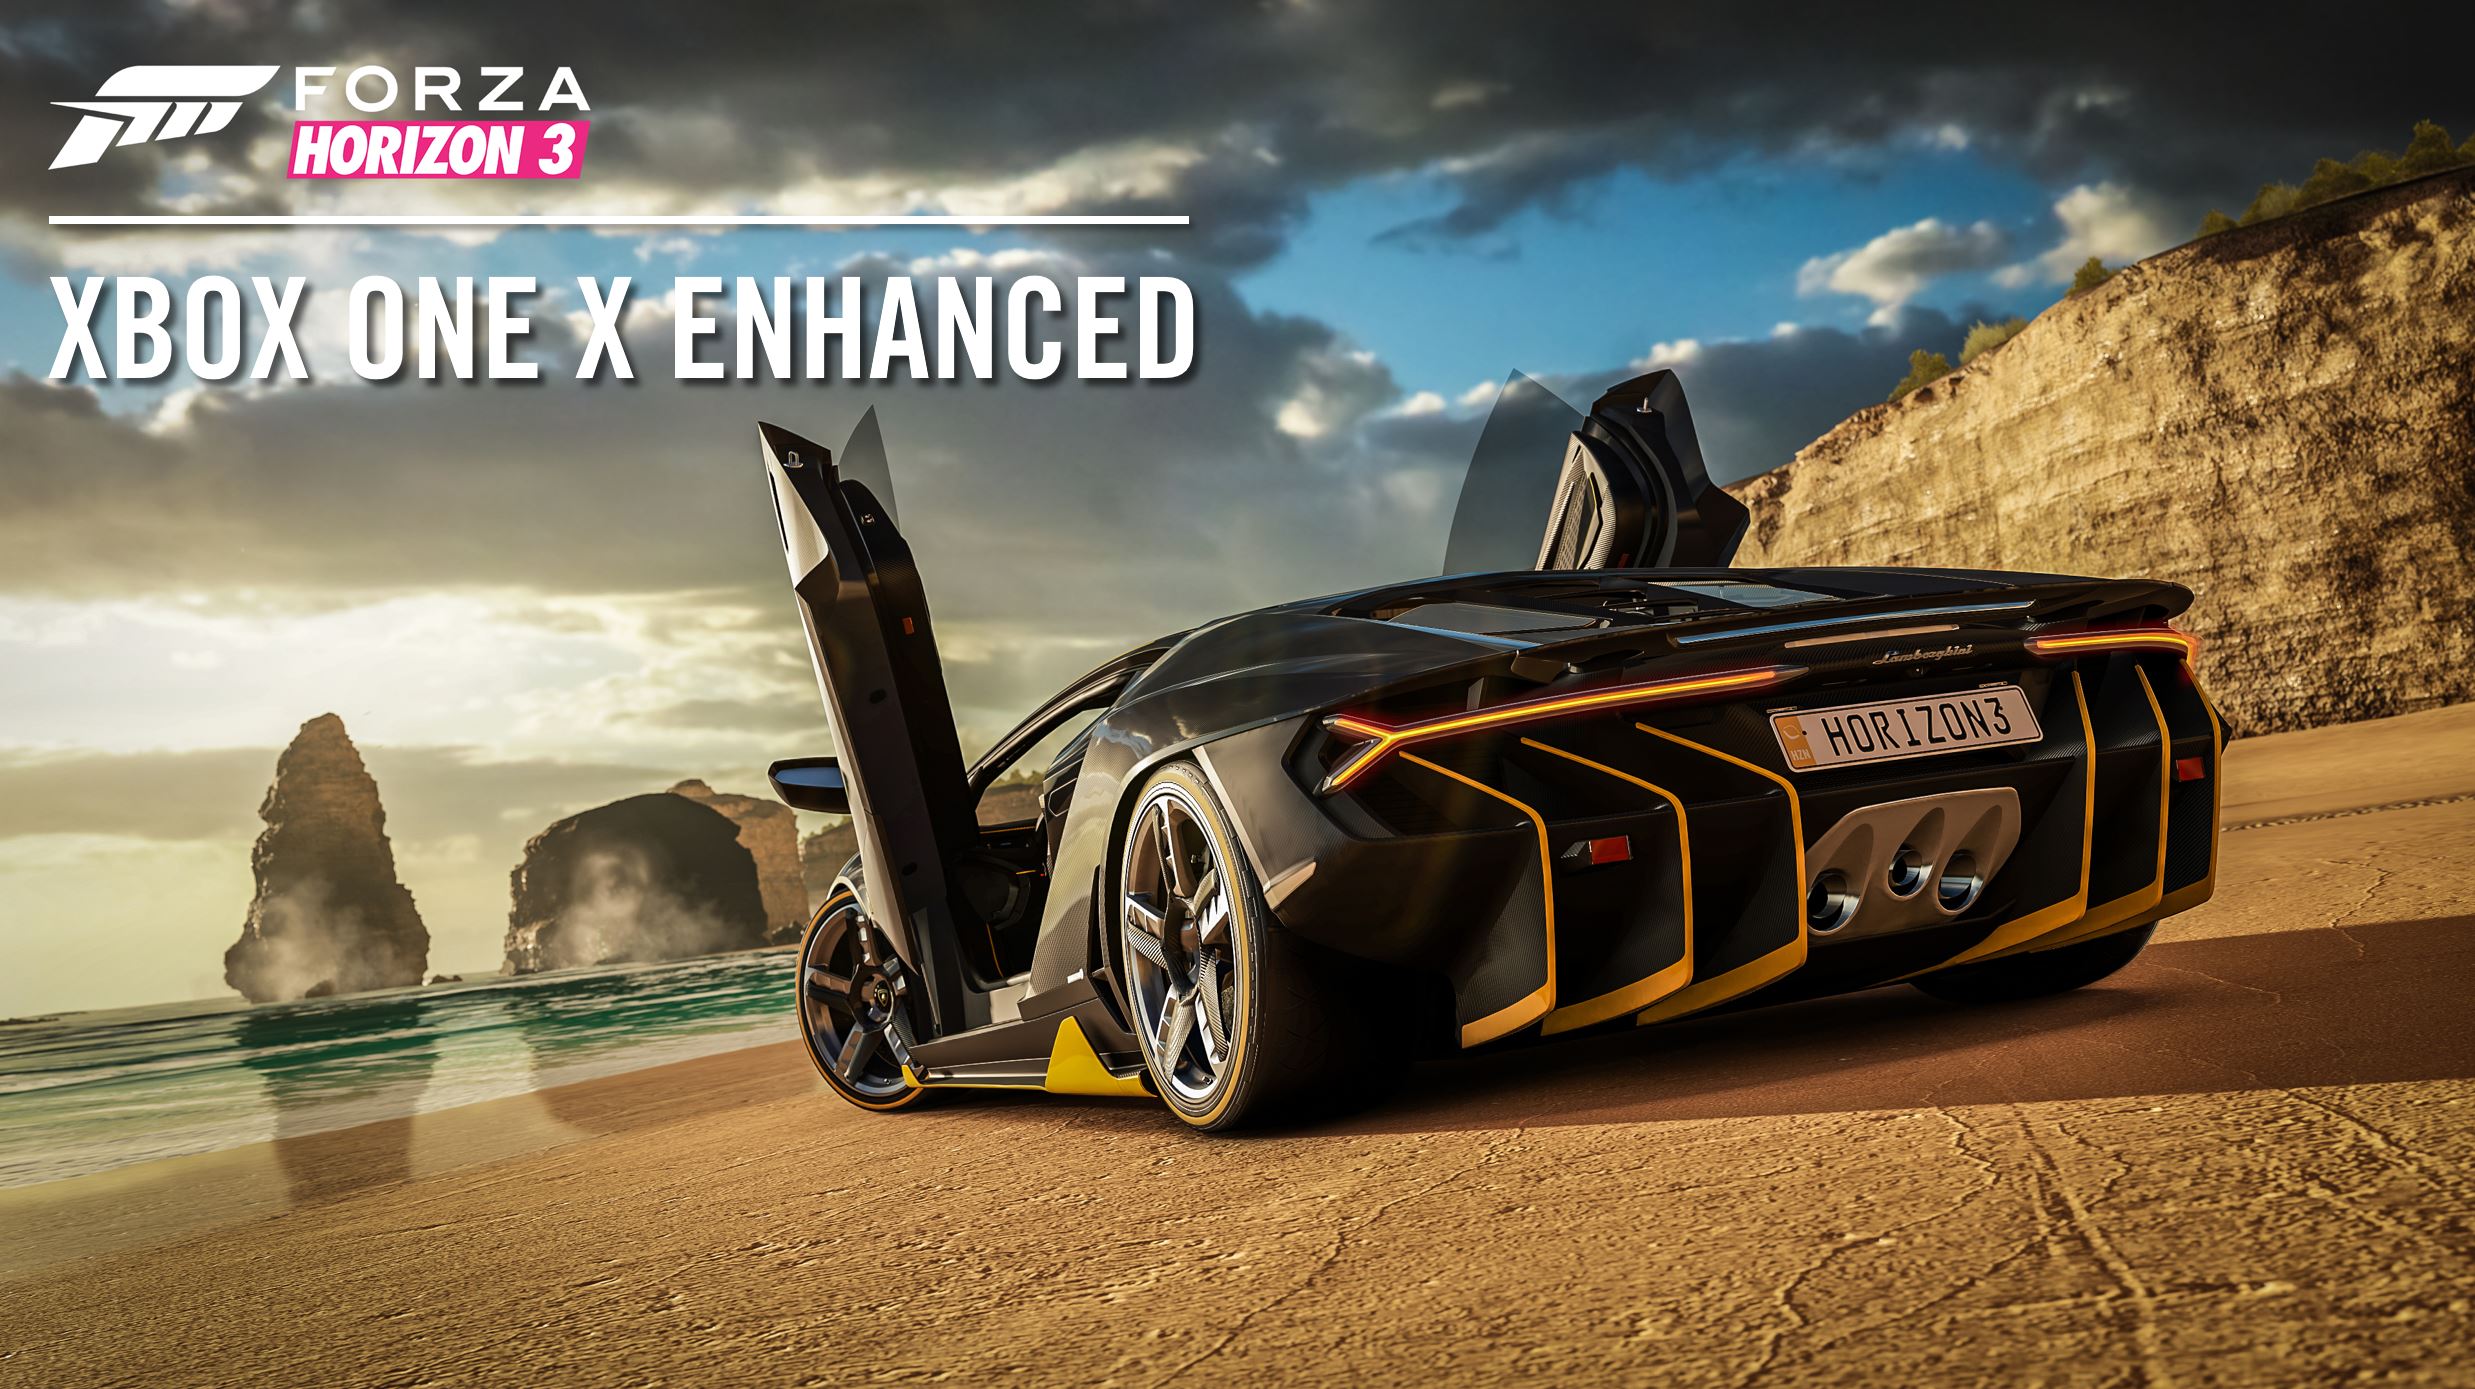 Video For Drive Australia’s Open Roads in Native 4K with Forza Horizon 3 Xbox One X Enhanced